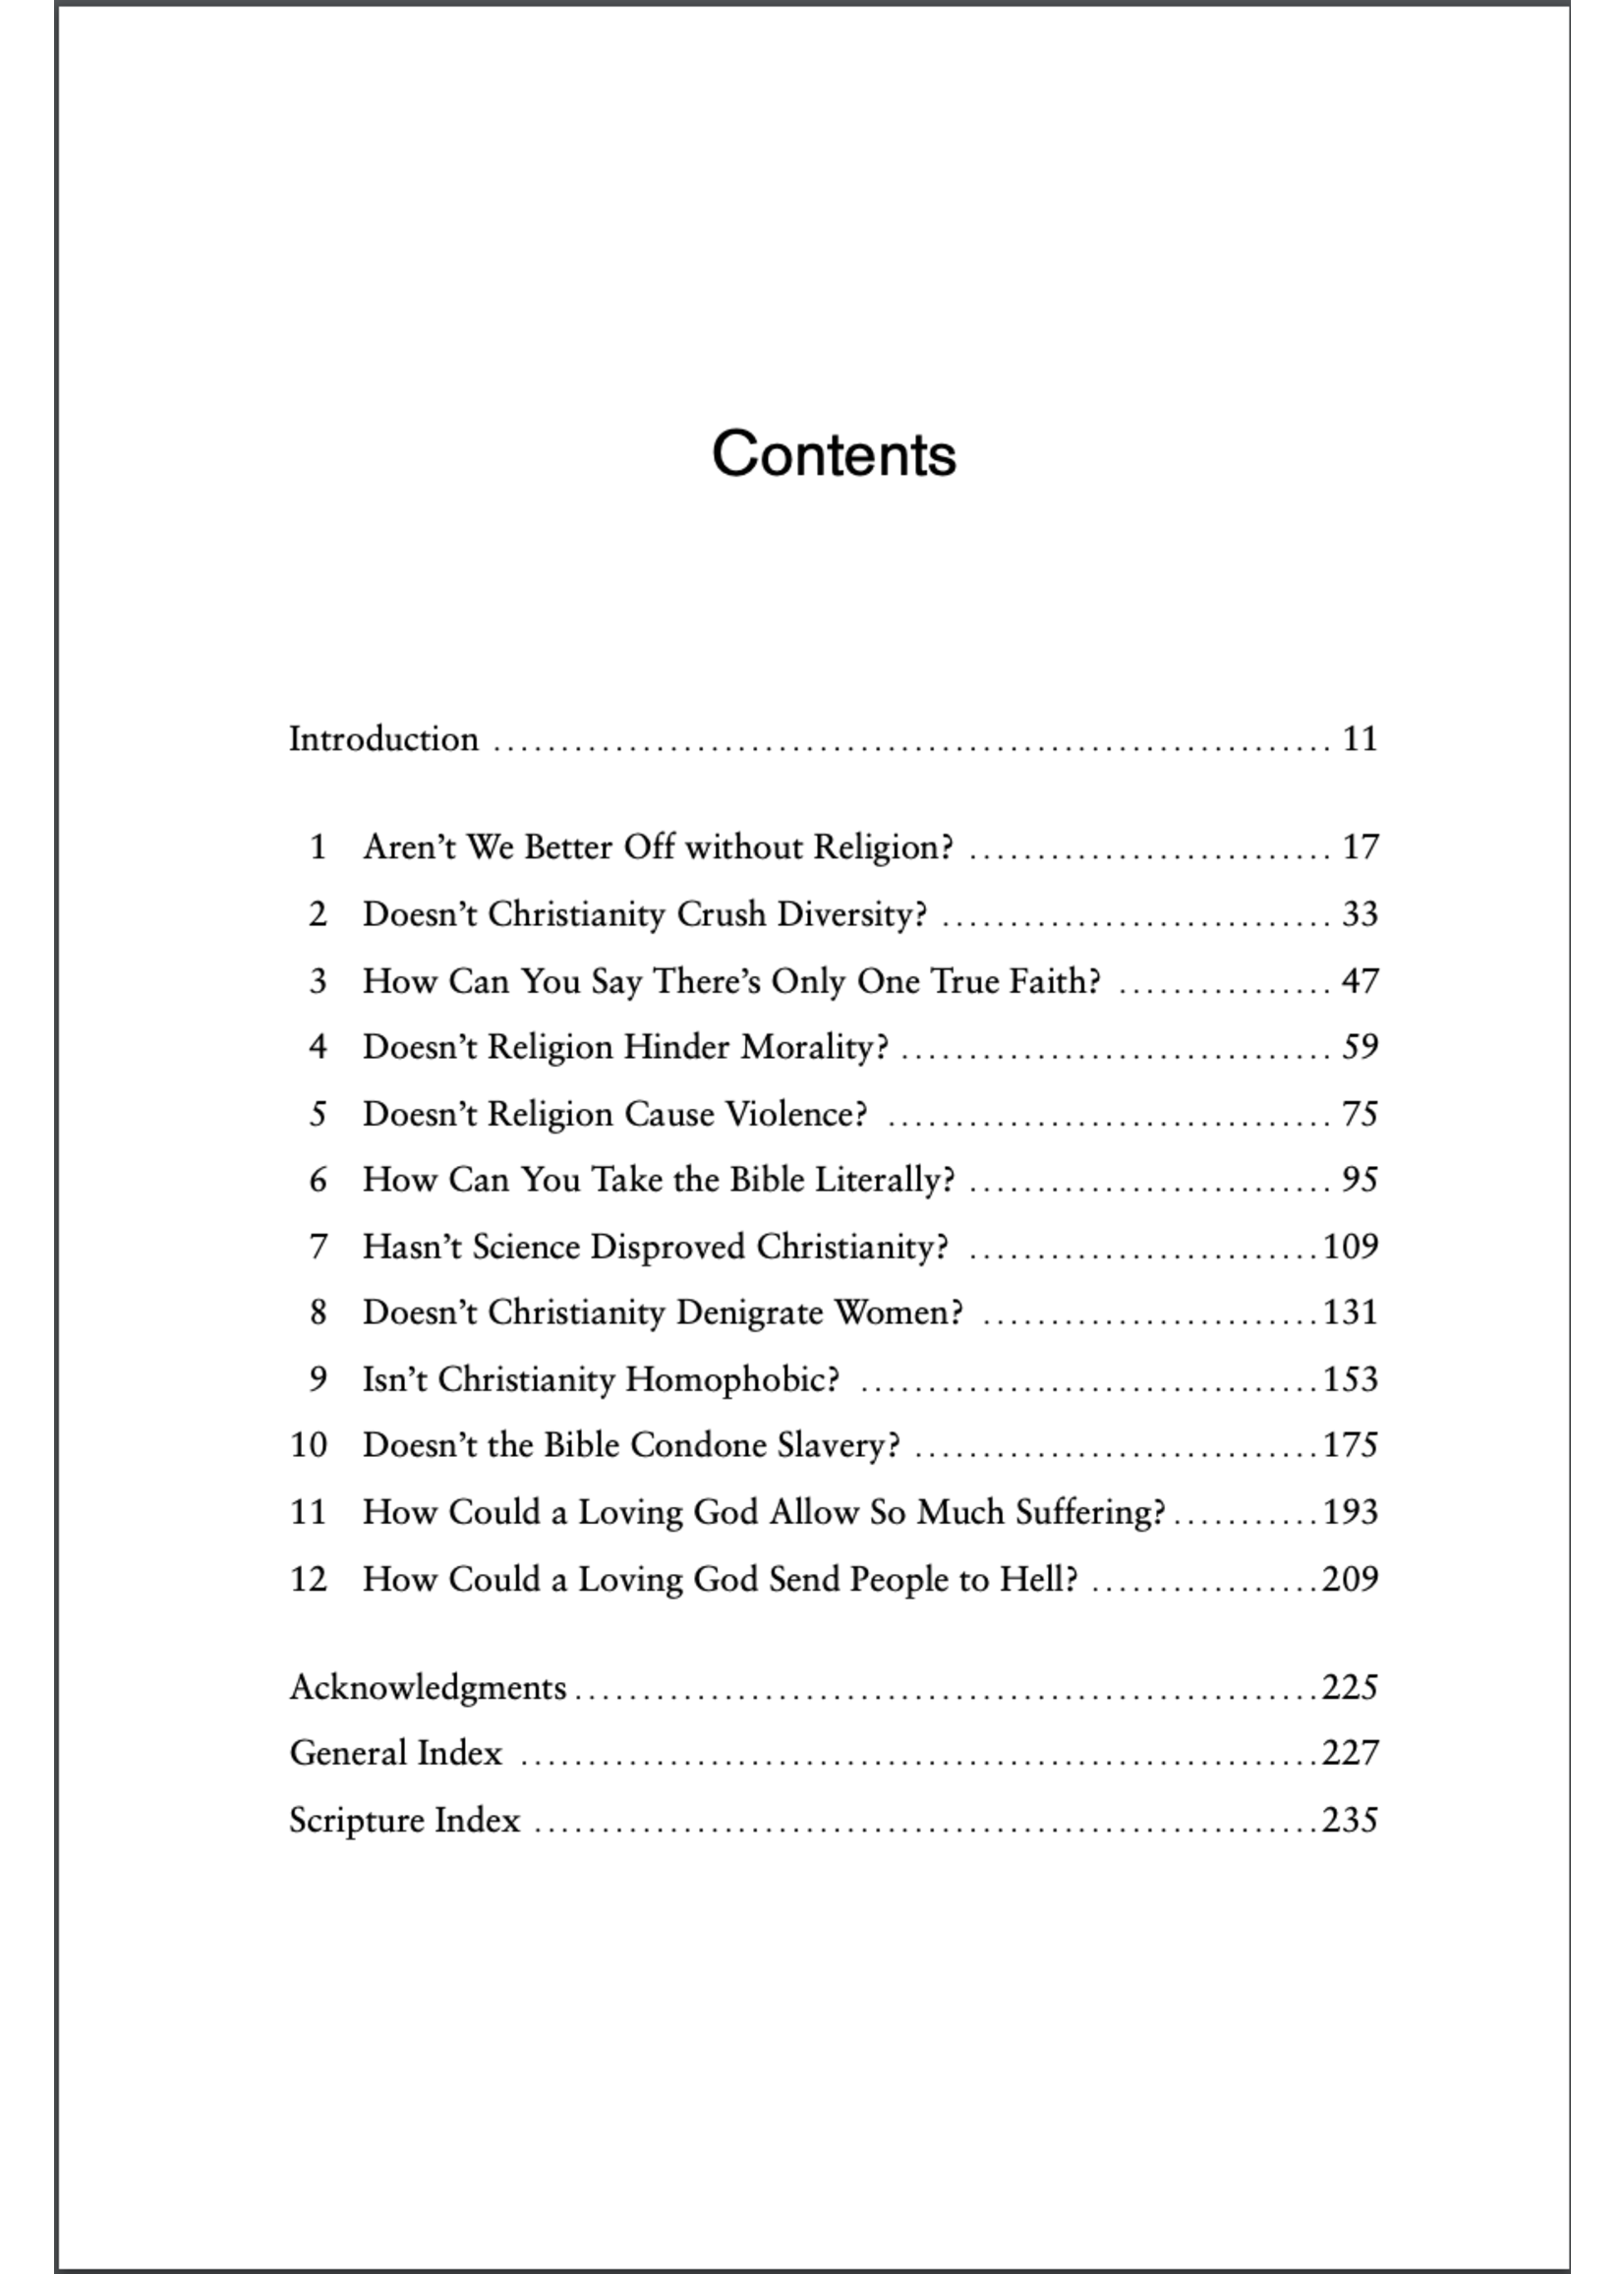 McLaughlin, Rebecca Confronting Christianity: 12 Hard Questions for the World's Largest Religion [Rebecca McLaughlin]